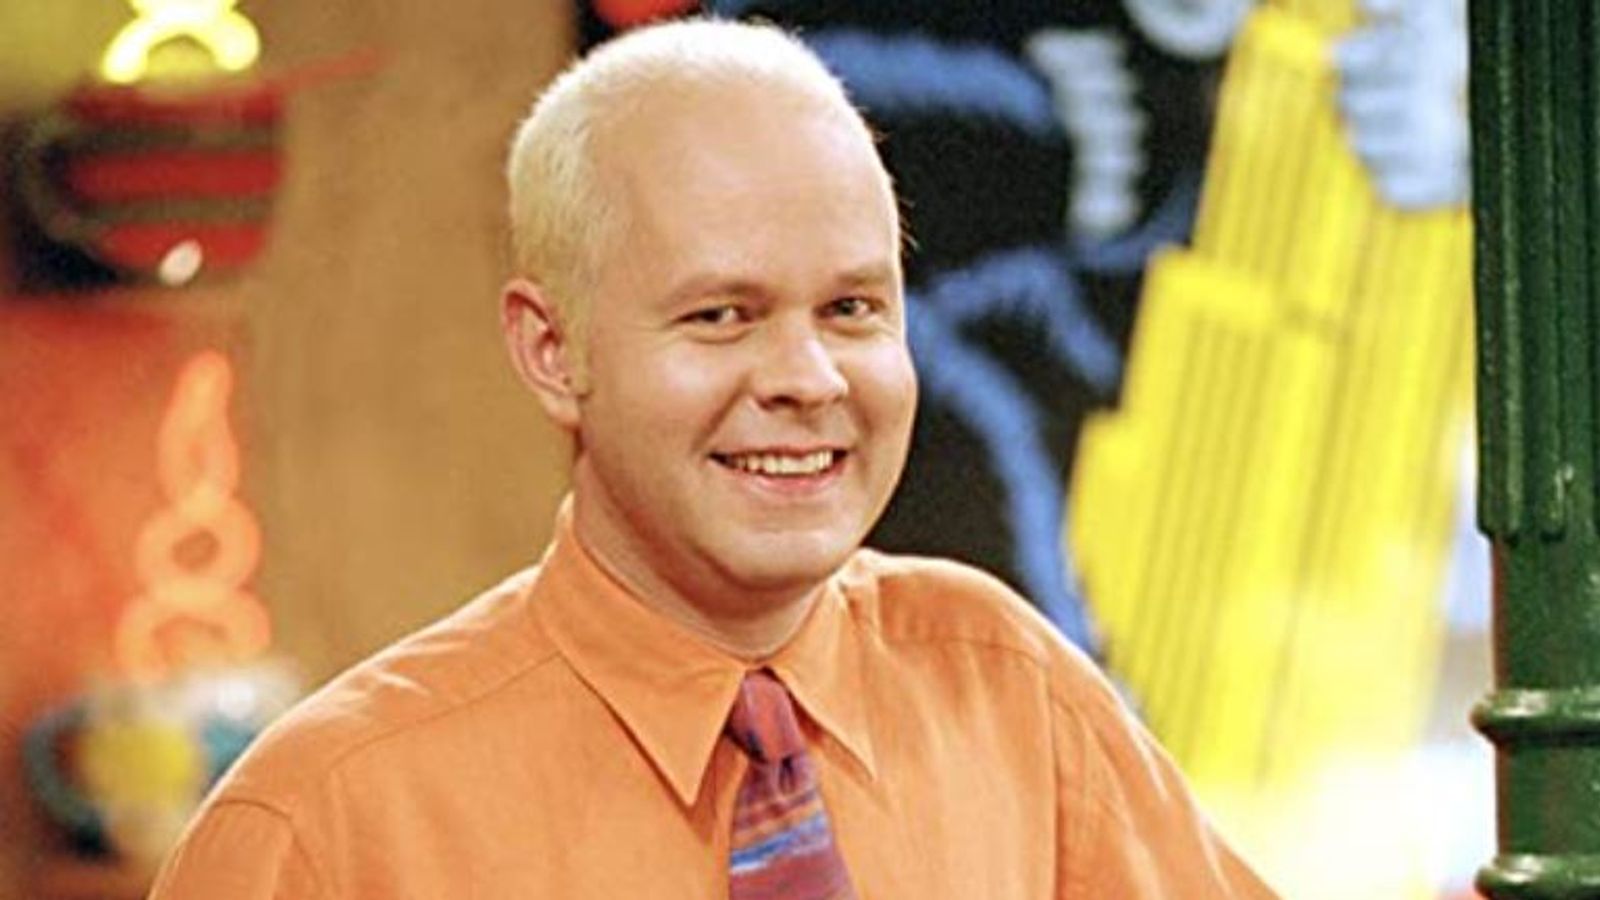 James Michael Tyler, who played Gunther in Friends, dies aged 59